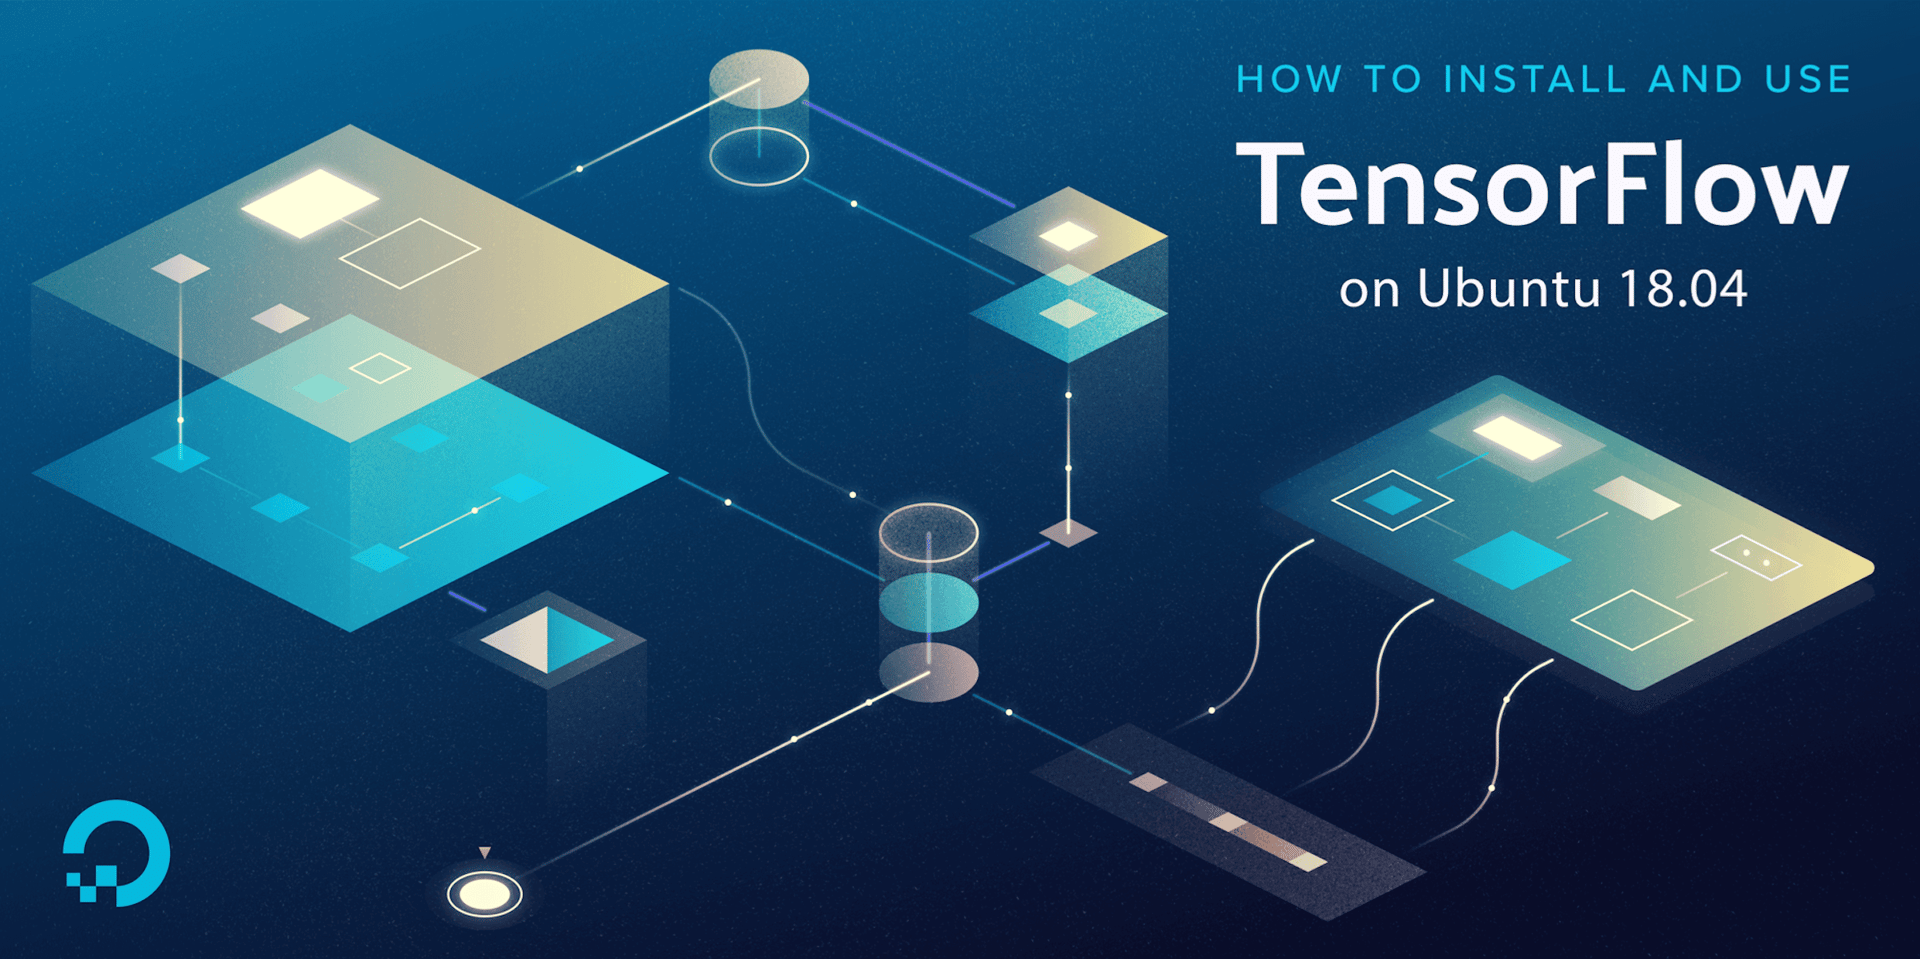 How To Install and Use TensorFlow on Ubuntu 18.04